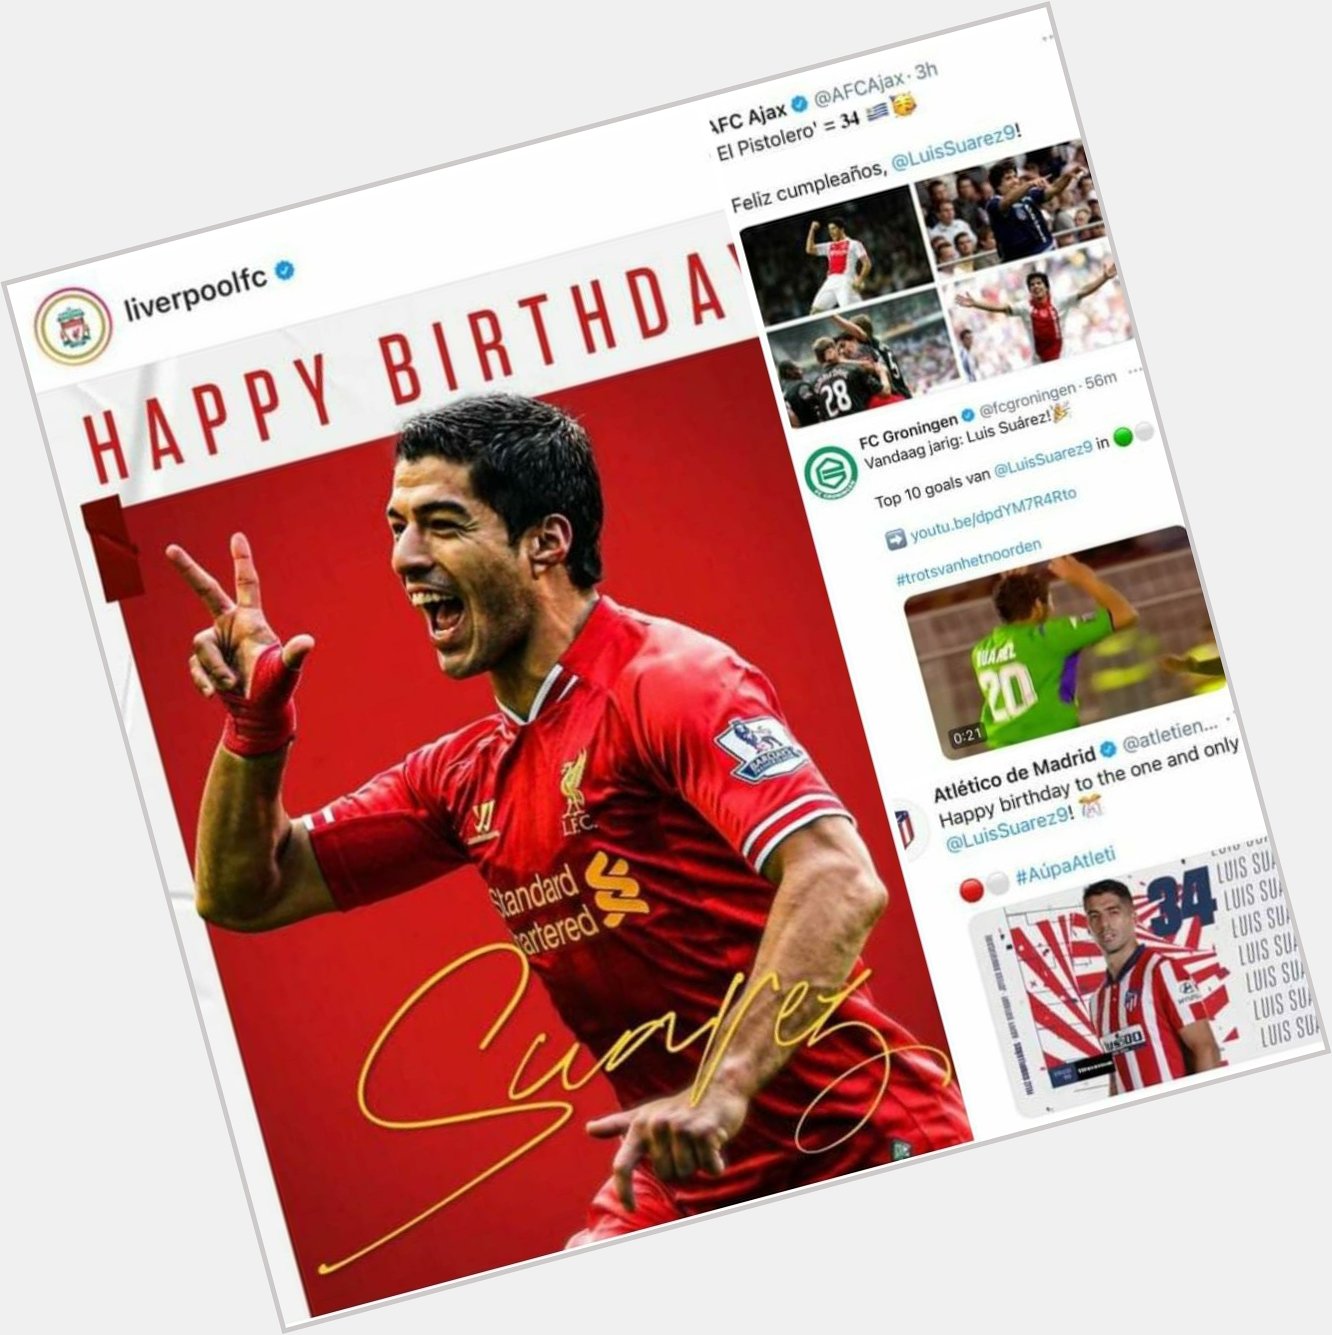 Every club that Luis Suarez has played for, wished him a happy birthday except fc Barcelona! 